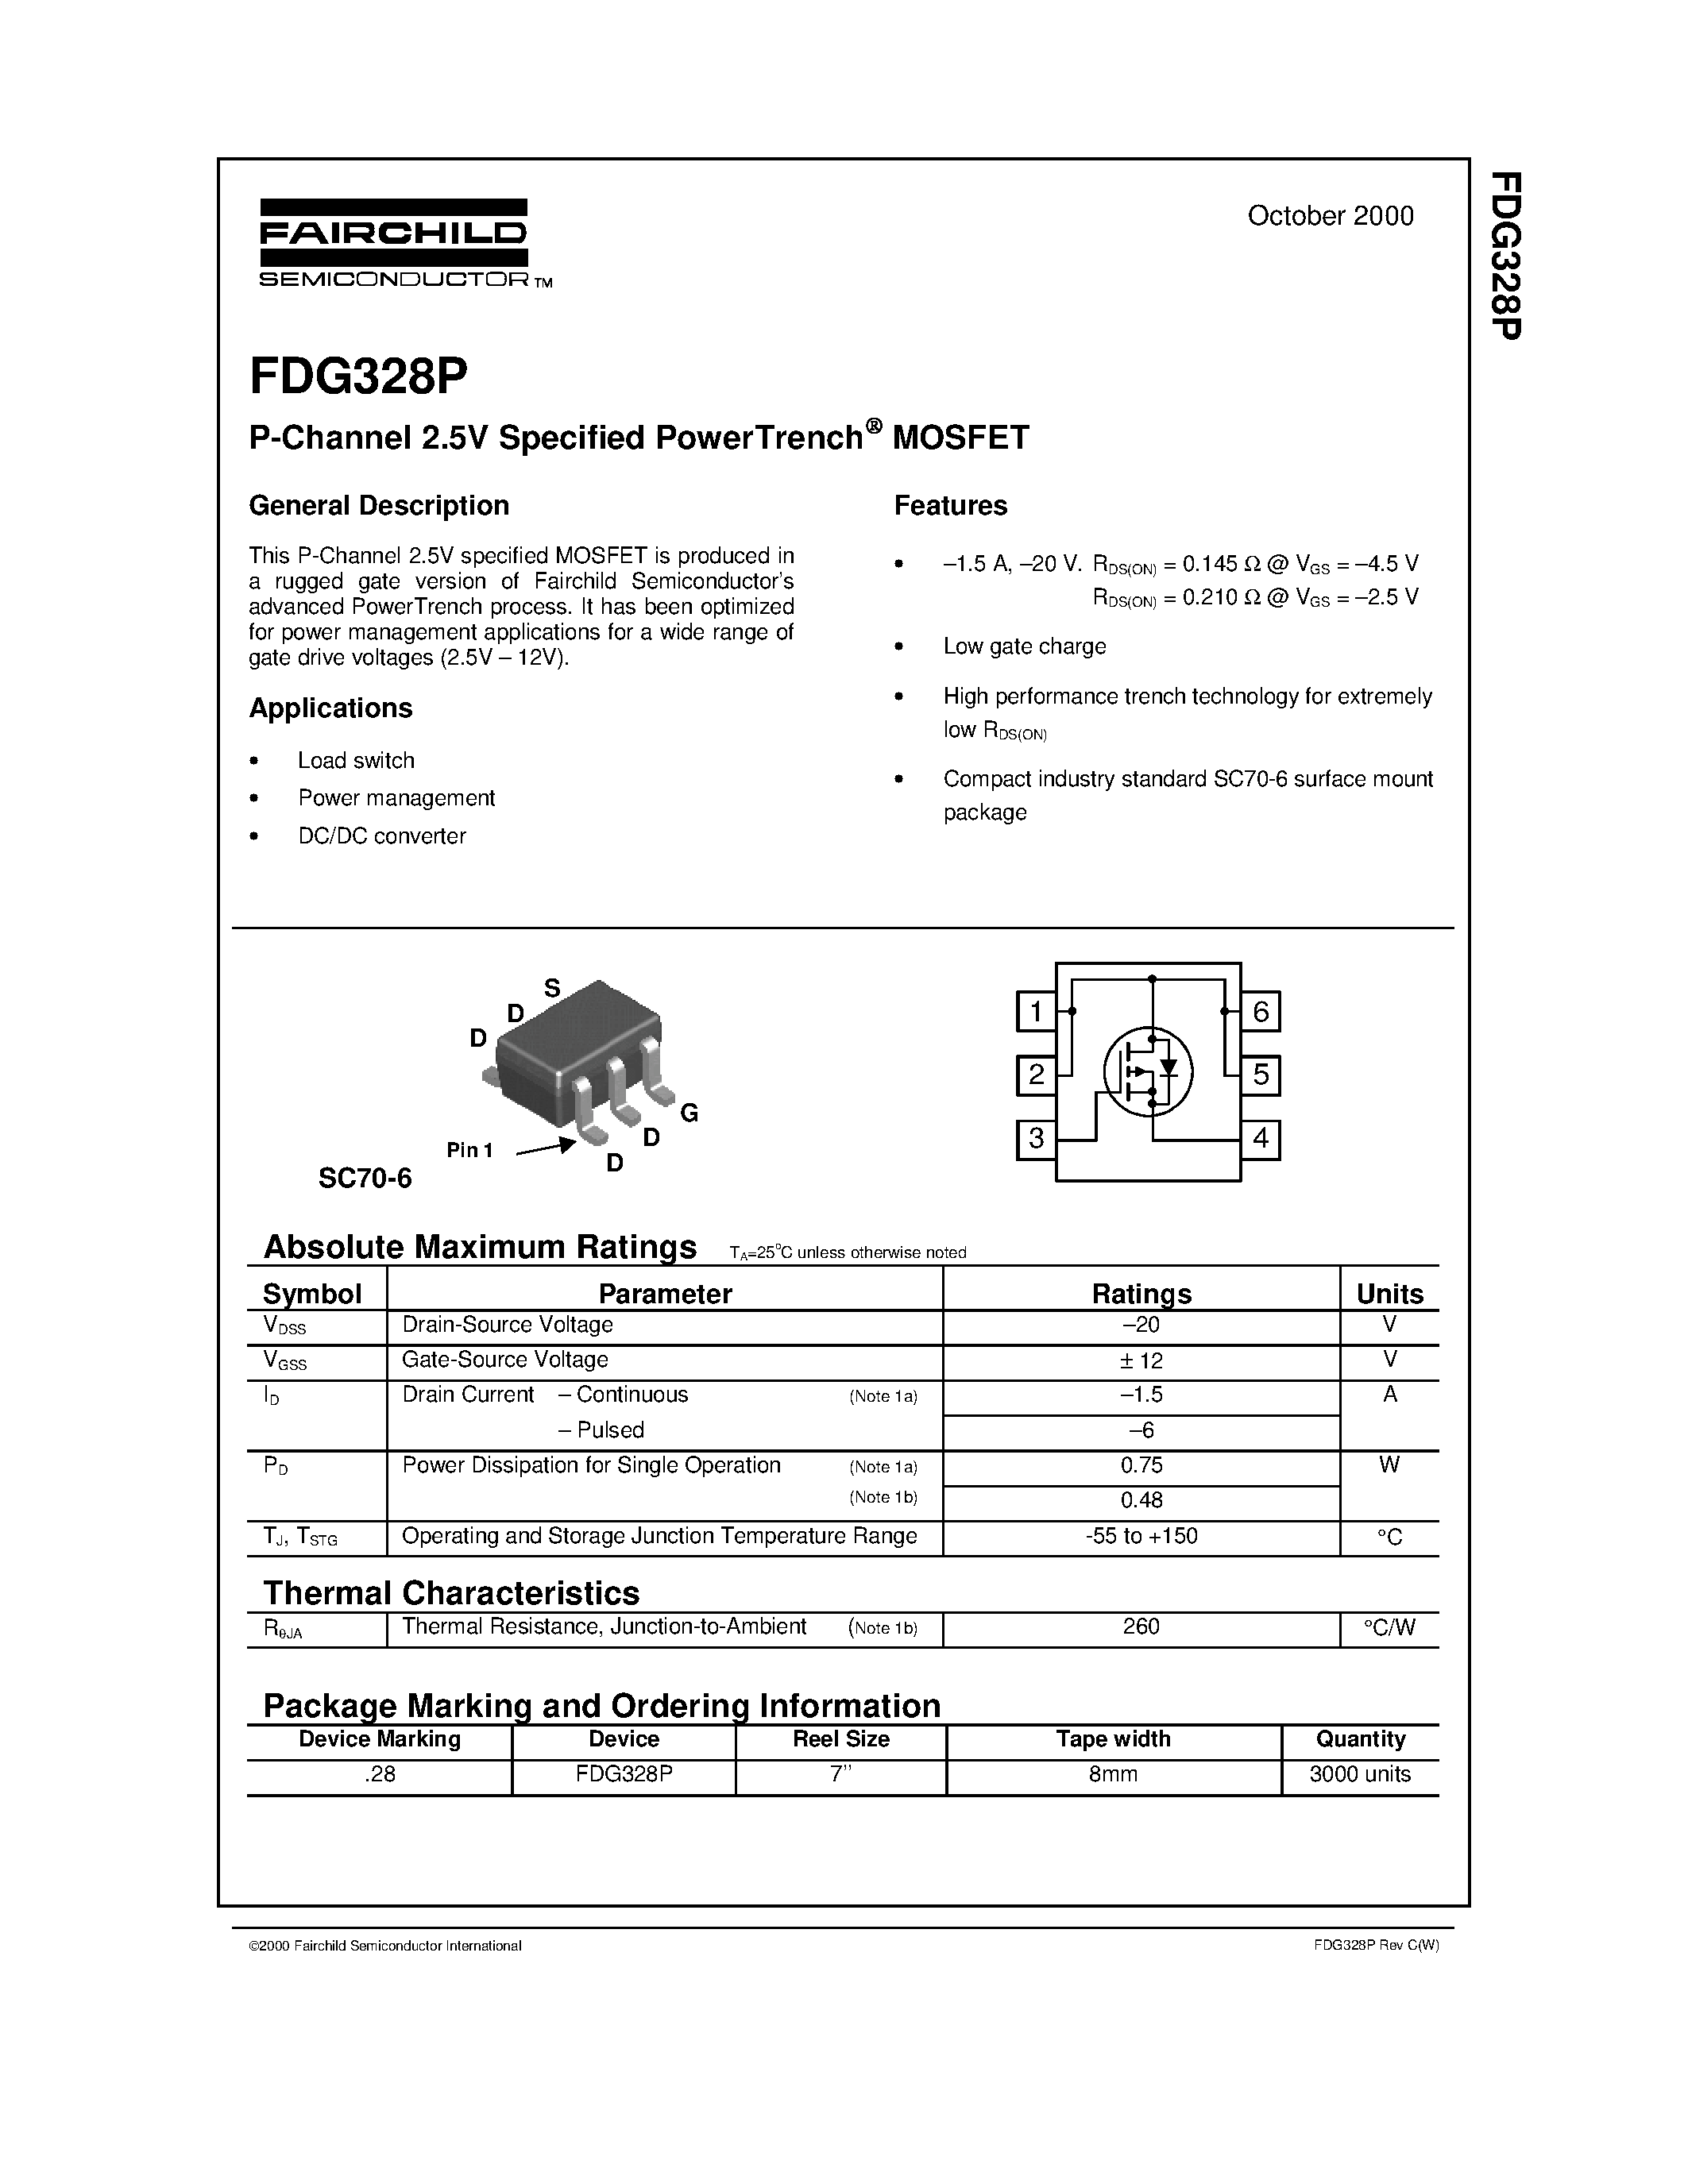 Datasheet FDG328P - P-Channel 2.5V Specified PowerTrench MOSFET page 1